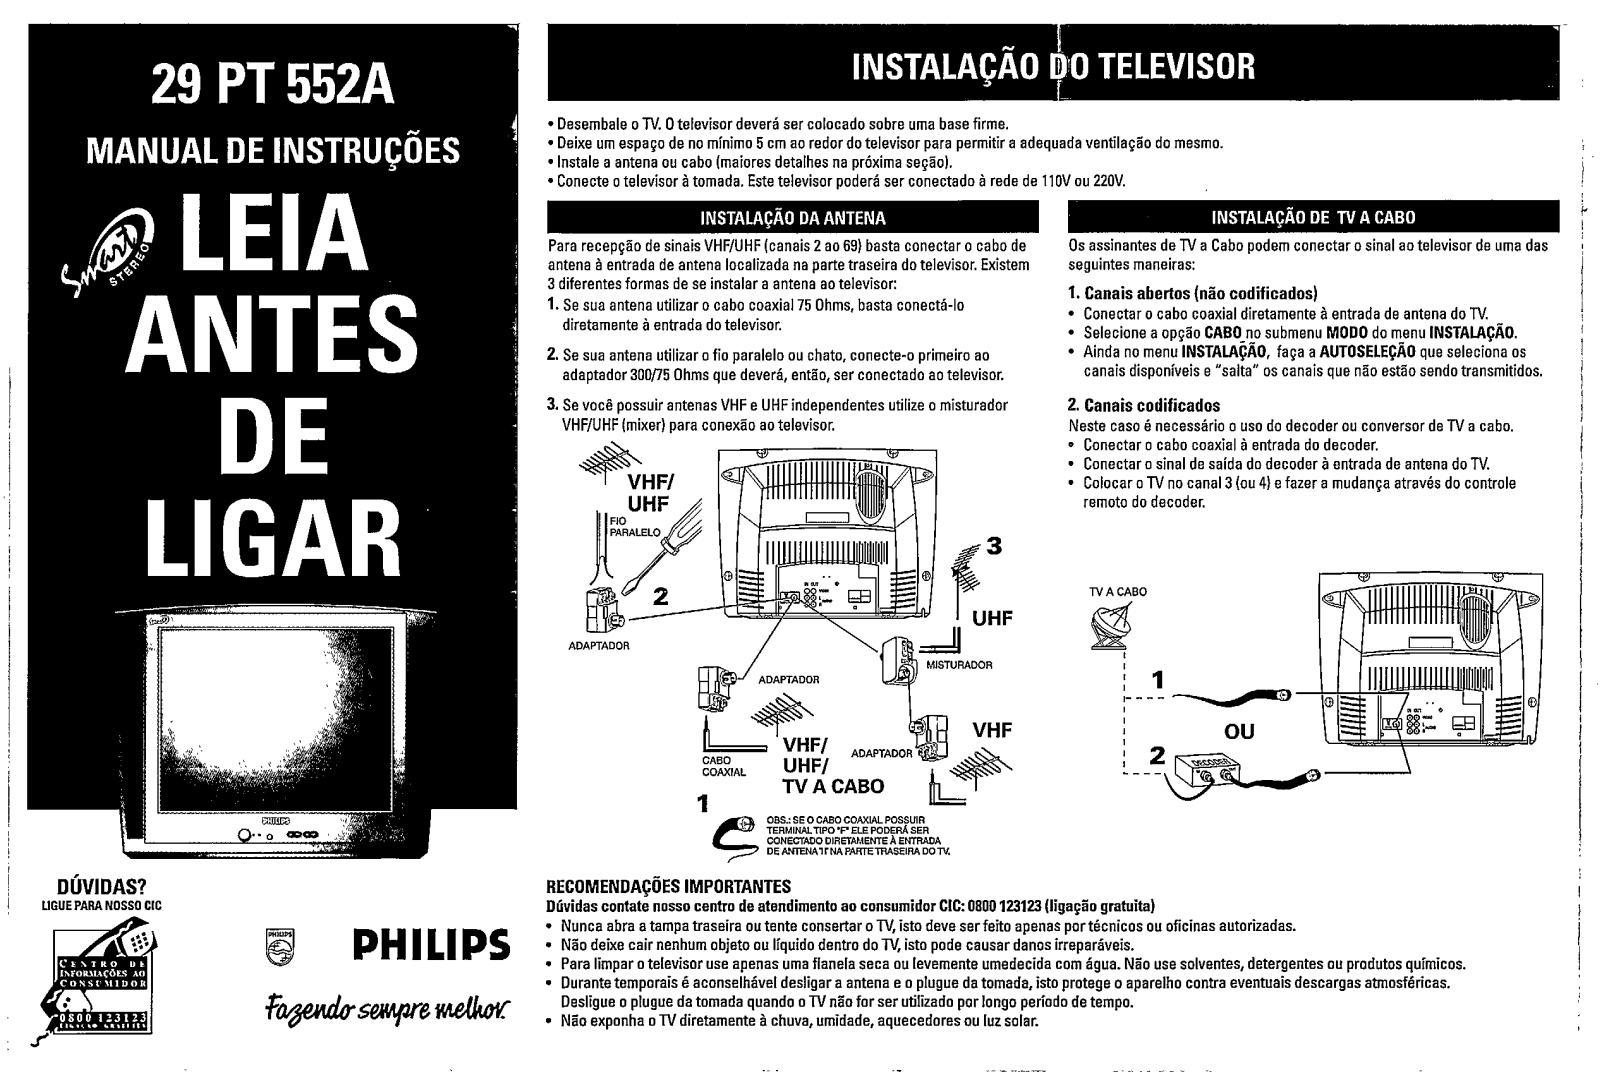 Philips 29PT552A User Manual